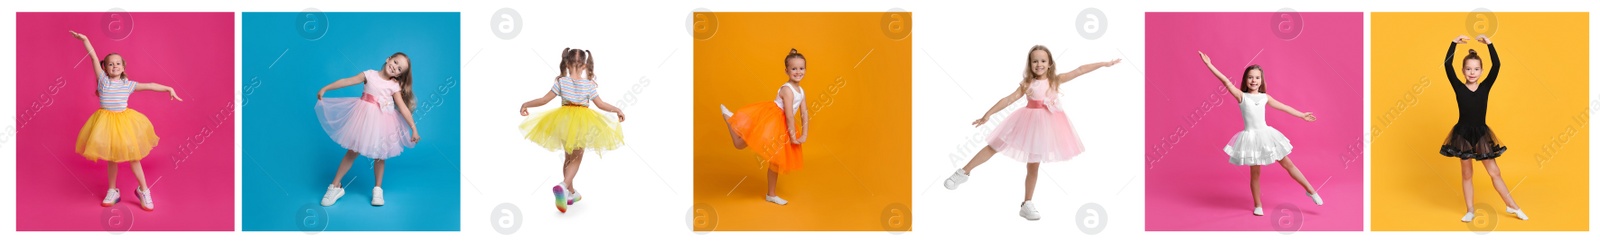 Image of Collage with photos of cute little girls dancing on different color backgrounds. Banner design